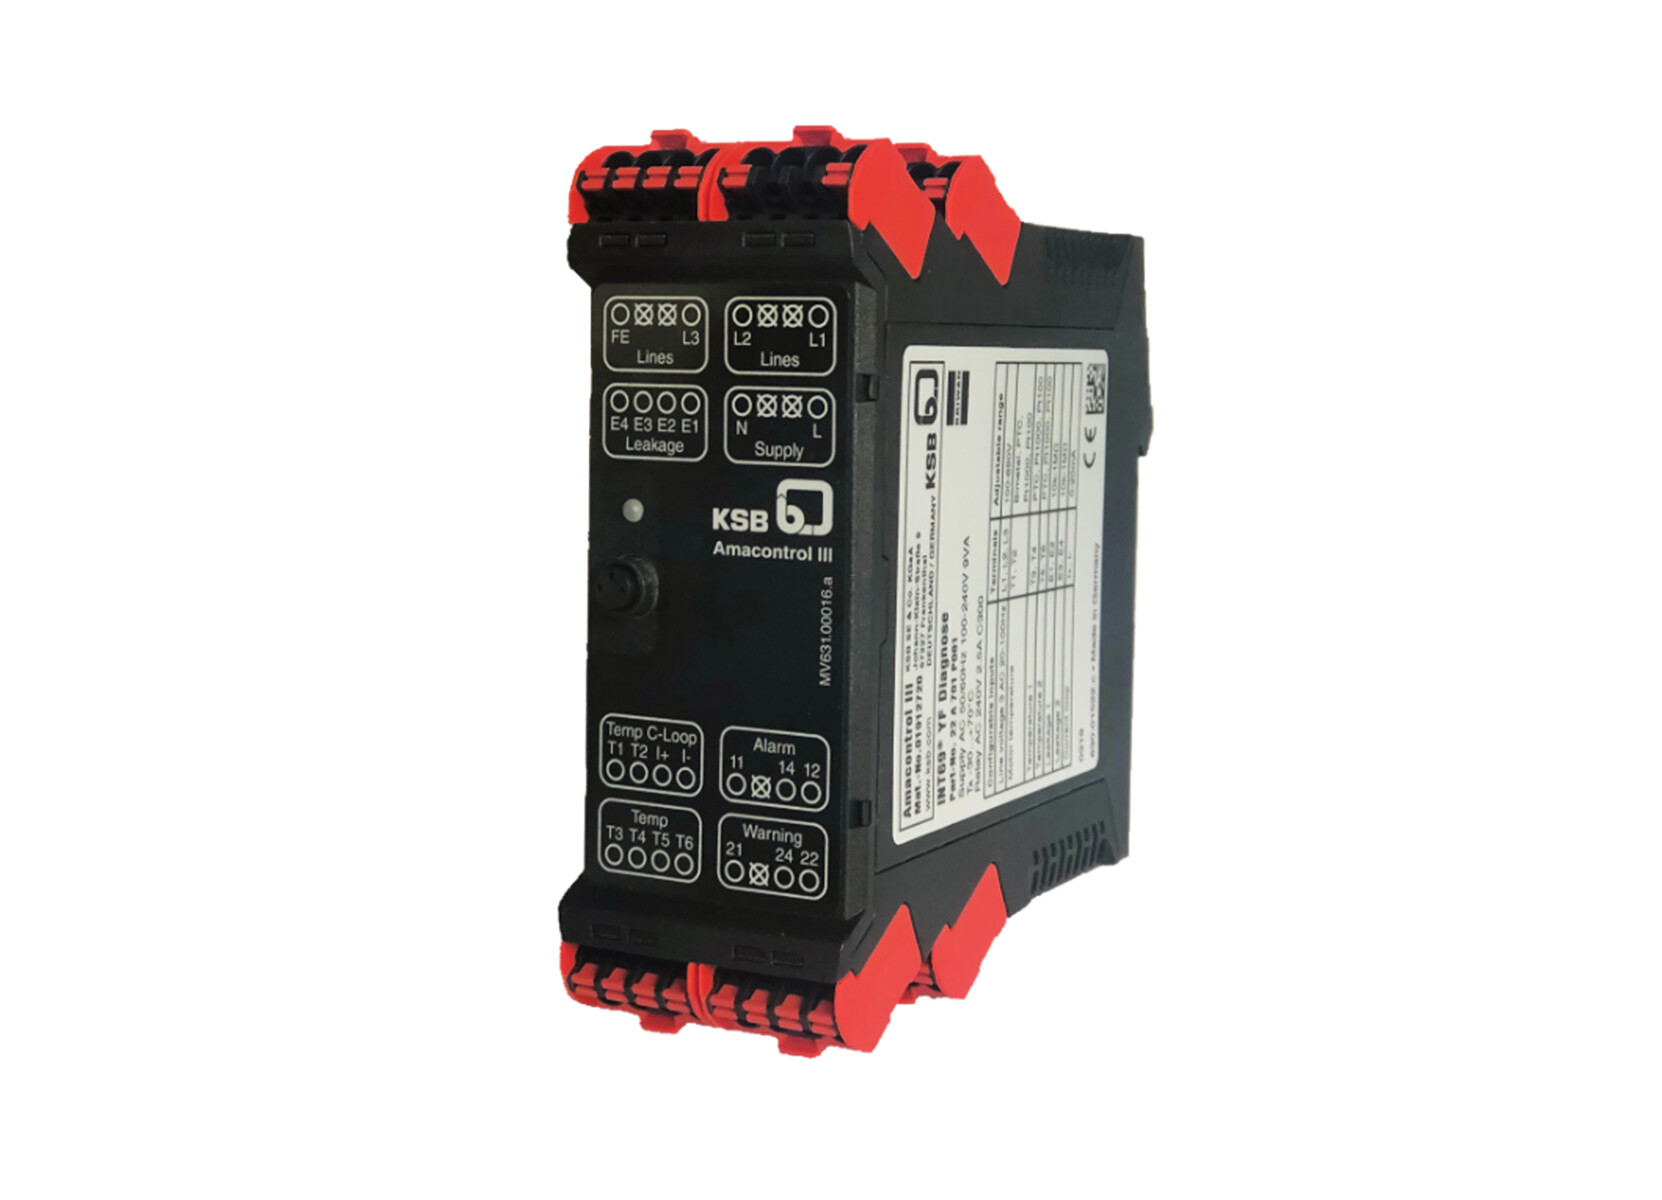 The new Amacontrol III module from the KSB Group 